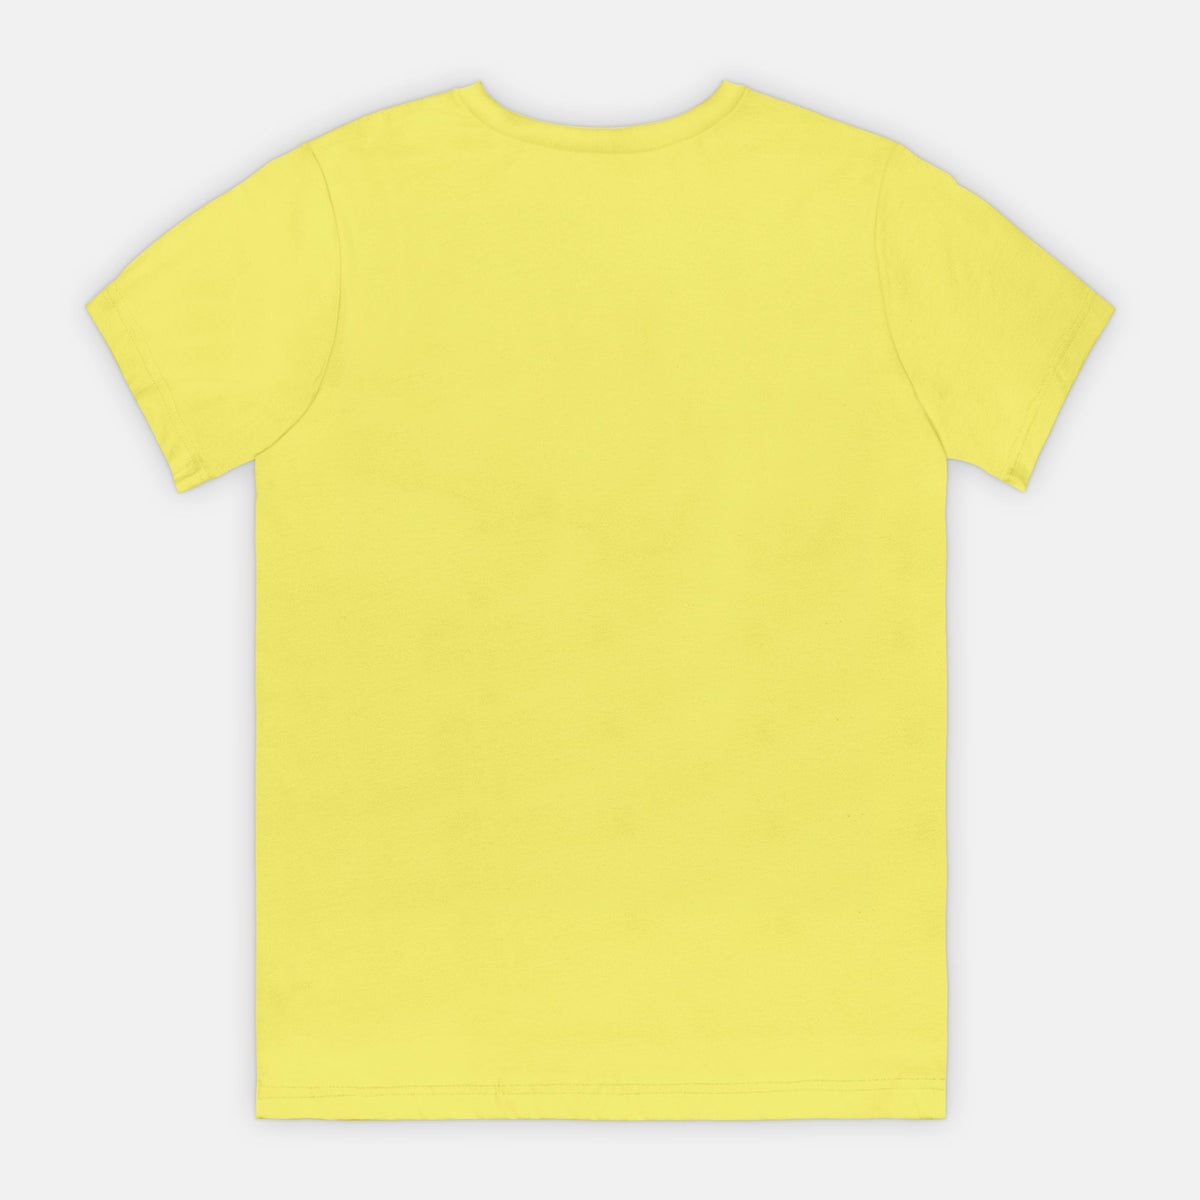 Sixth Grade Checked Out Tee